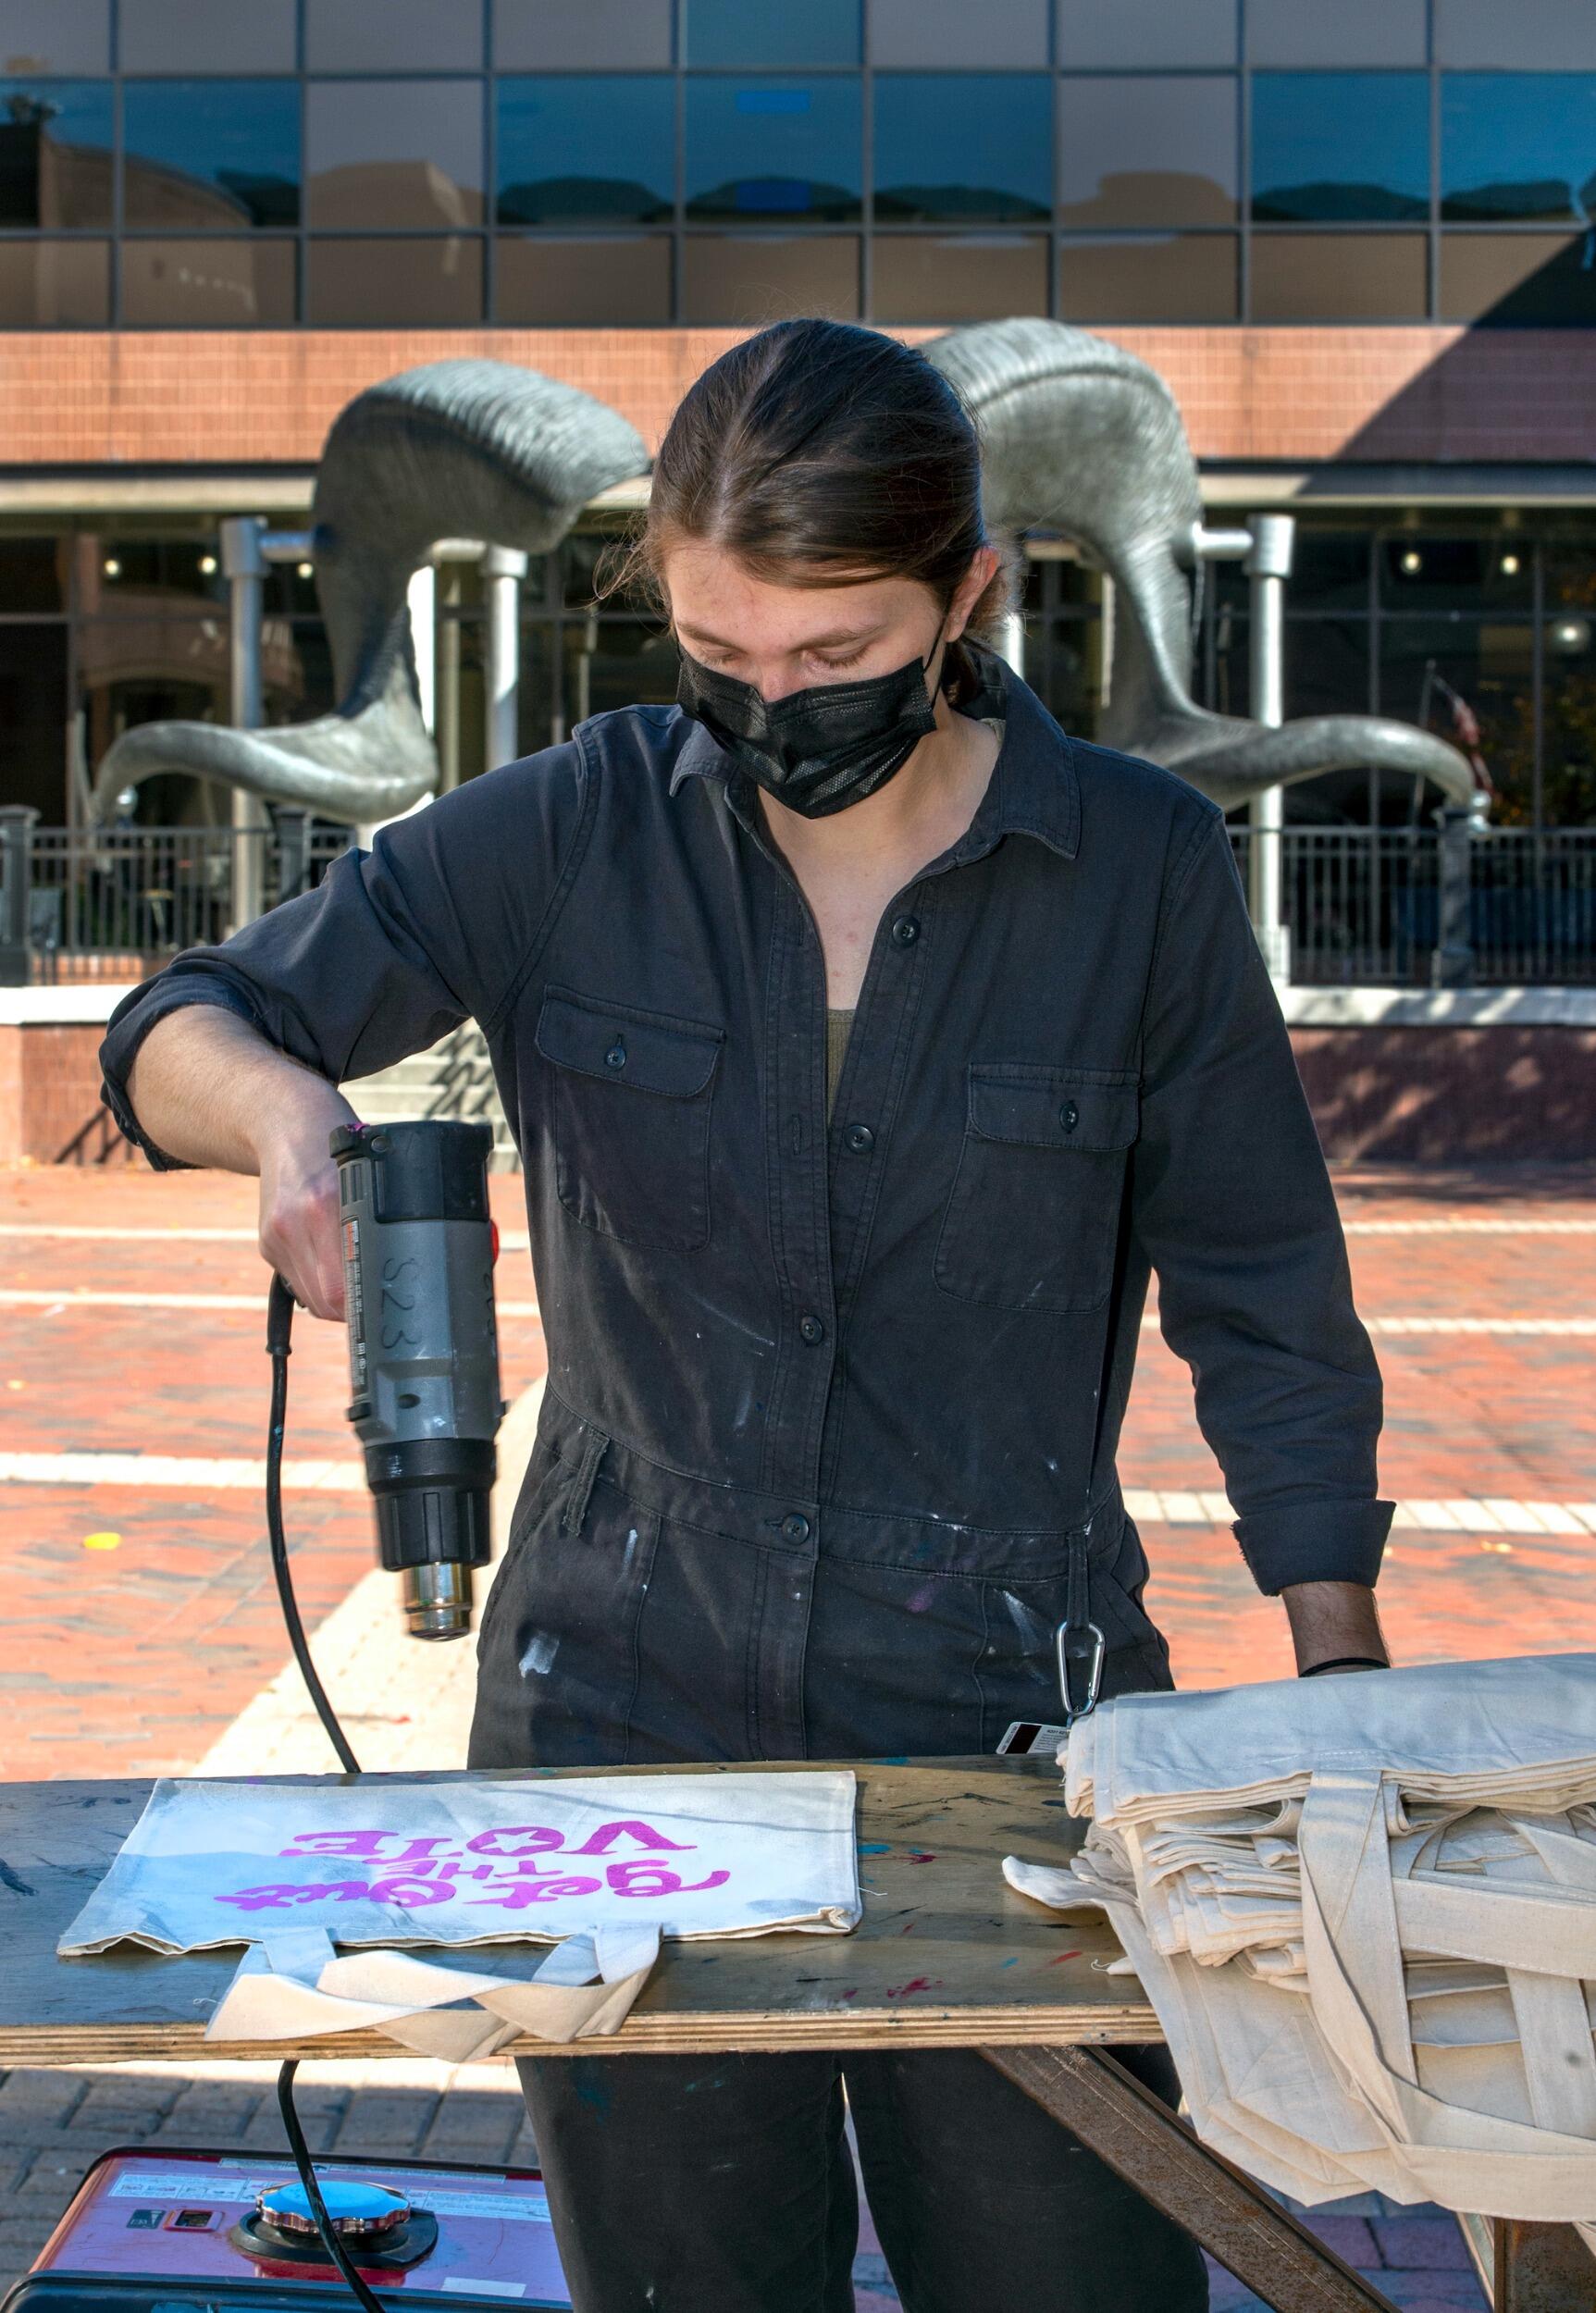 Students screen print tote bags at a VCU Votes event on Oct. 27.